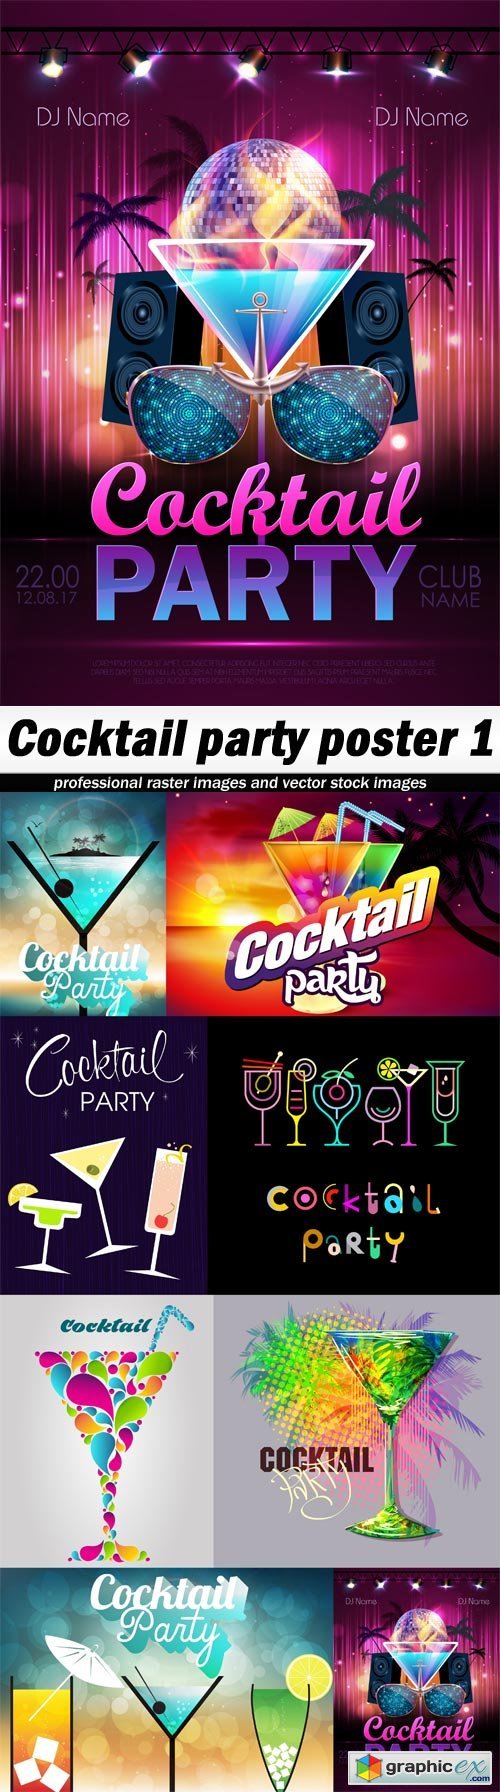 Cocktail party poster 1-8 EPS